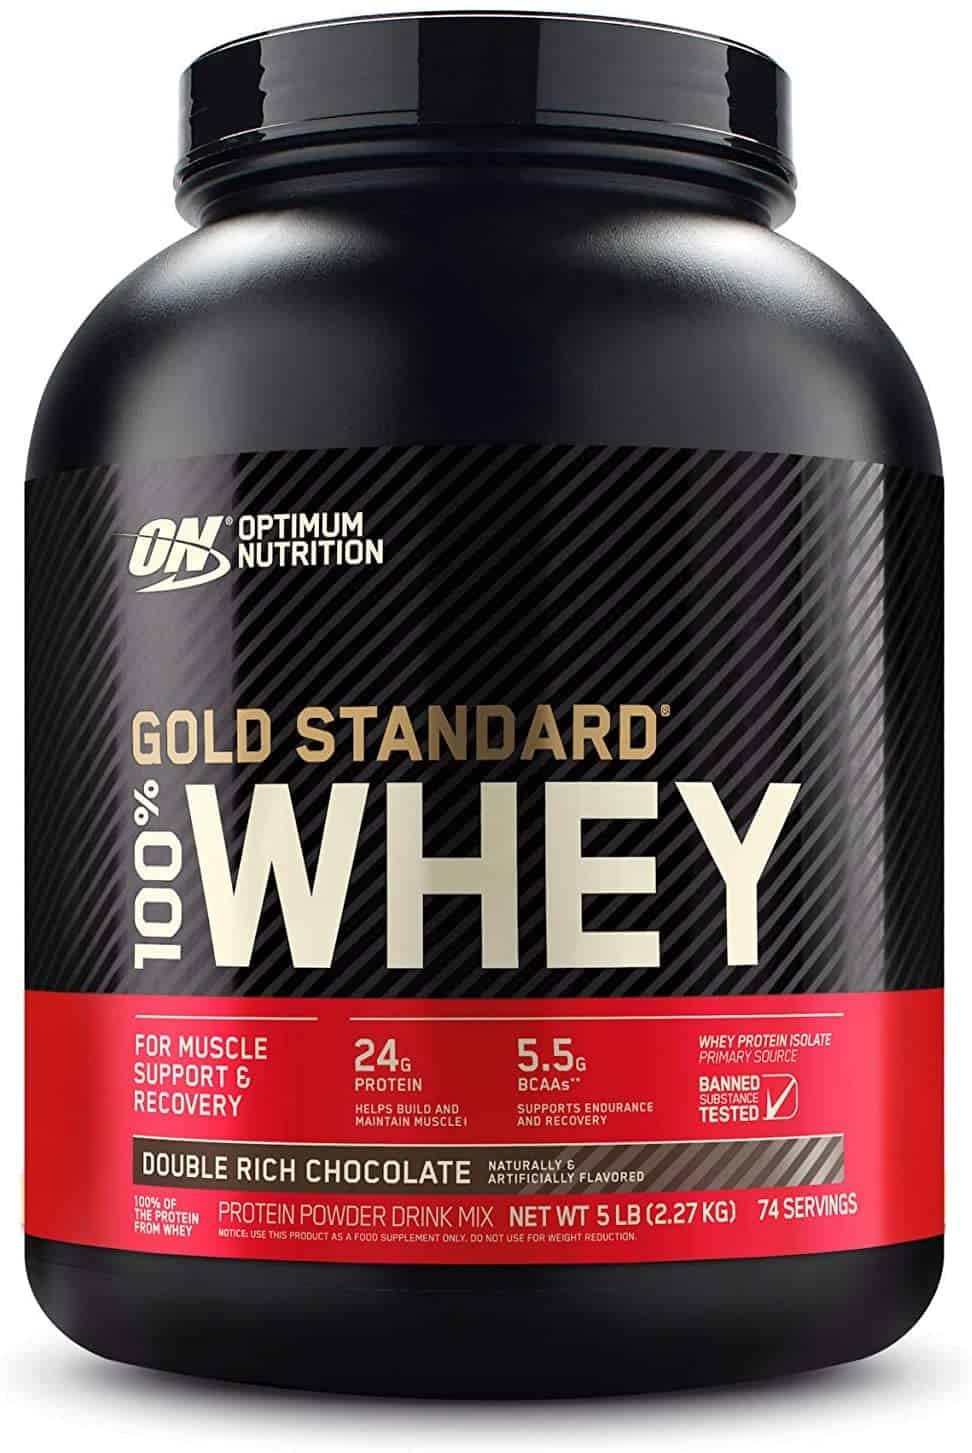 10 Best Low Carb Protein Powder In The Usa In 2021